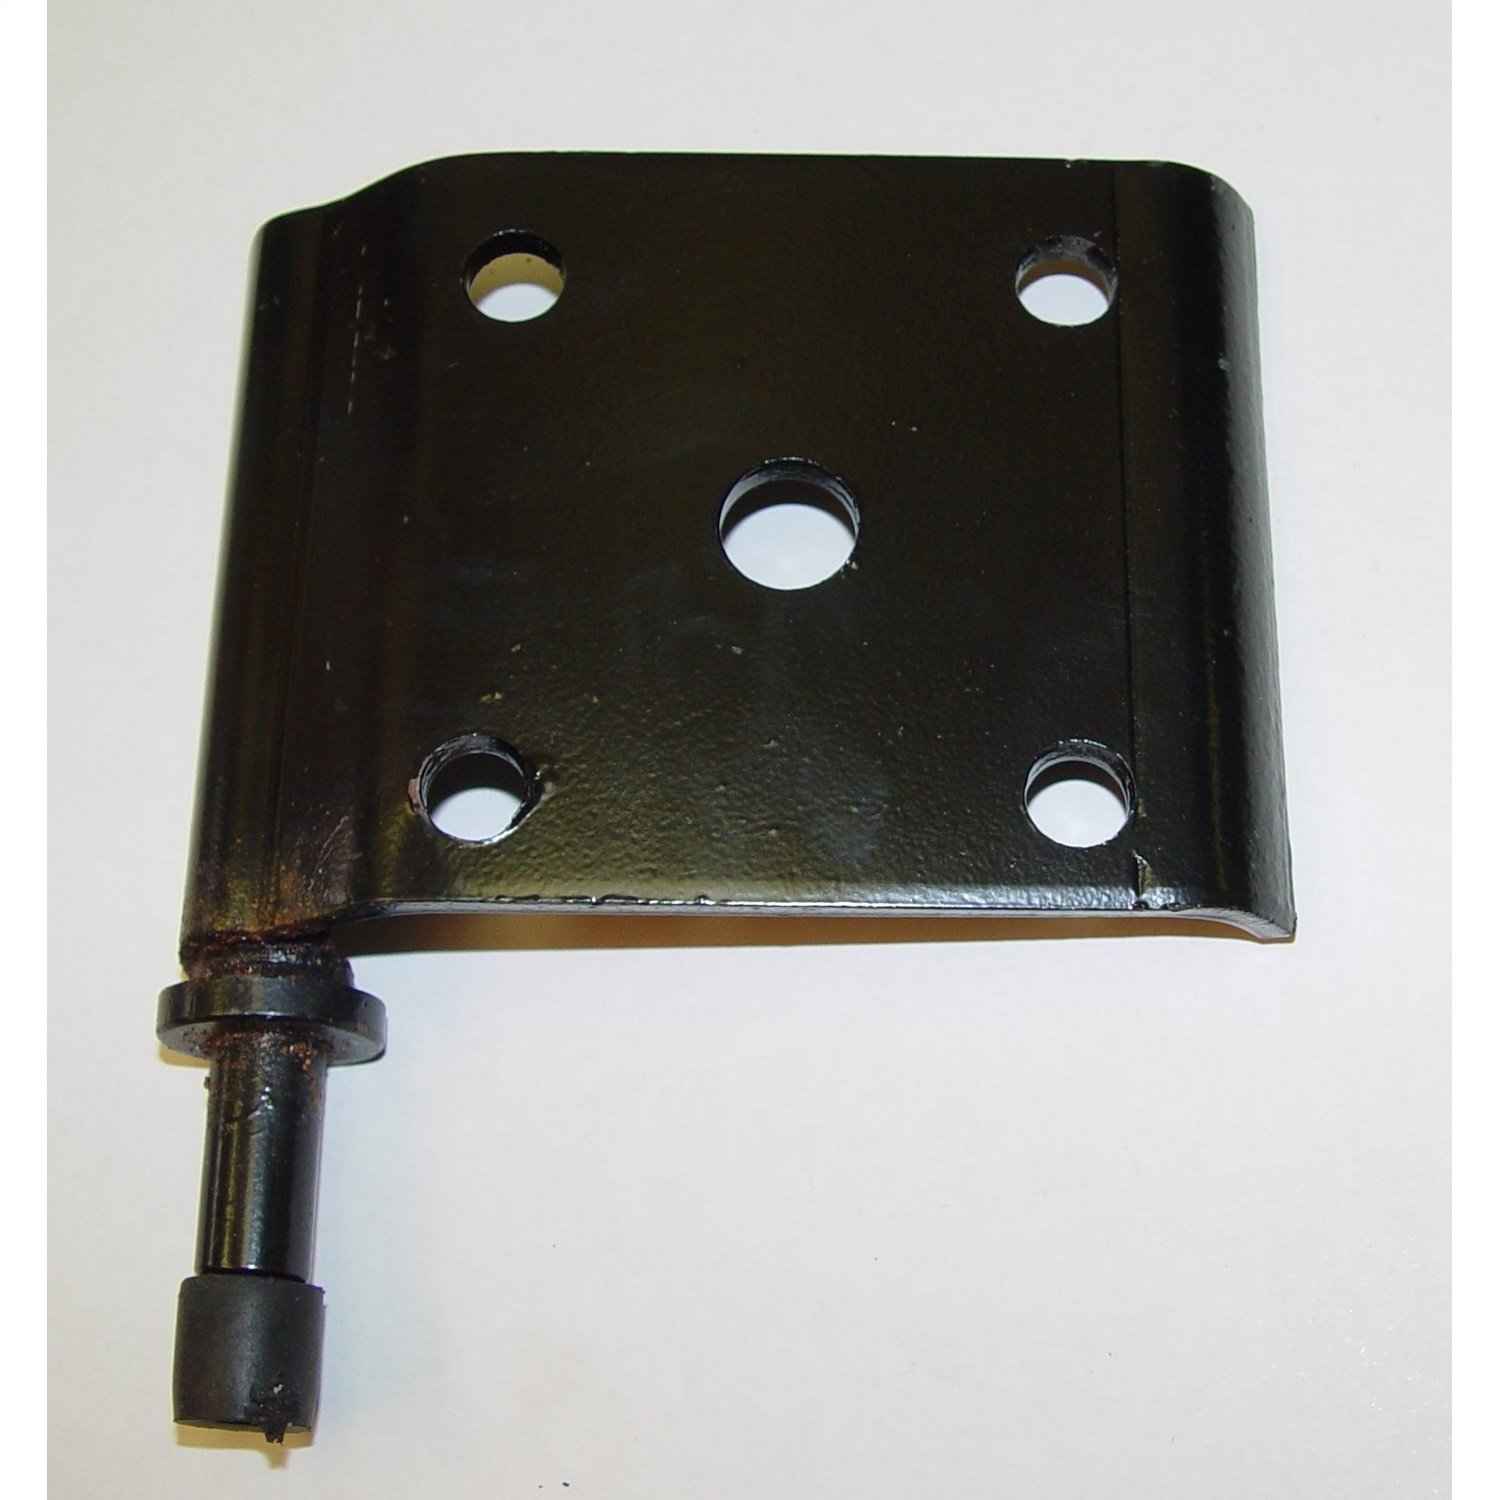 Replacement leaf spring plate from Omix-ADA, Fits right side of rear axle on 76-83 Jeep CJ5 76-86 CJ7 and 81-86 CJ8